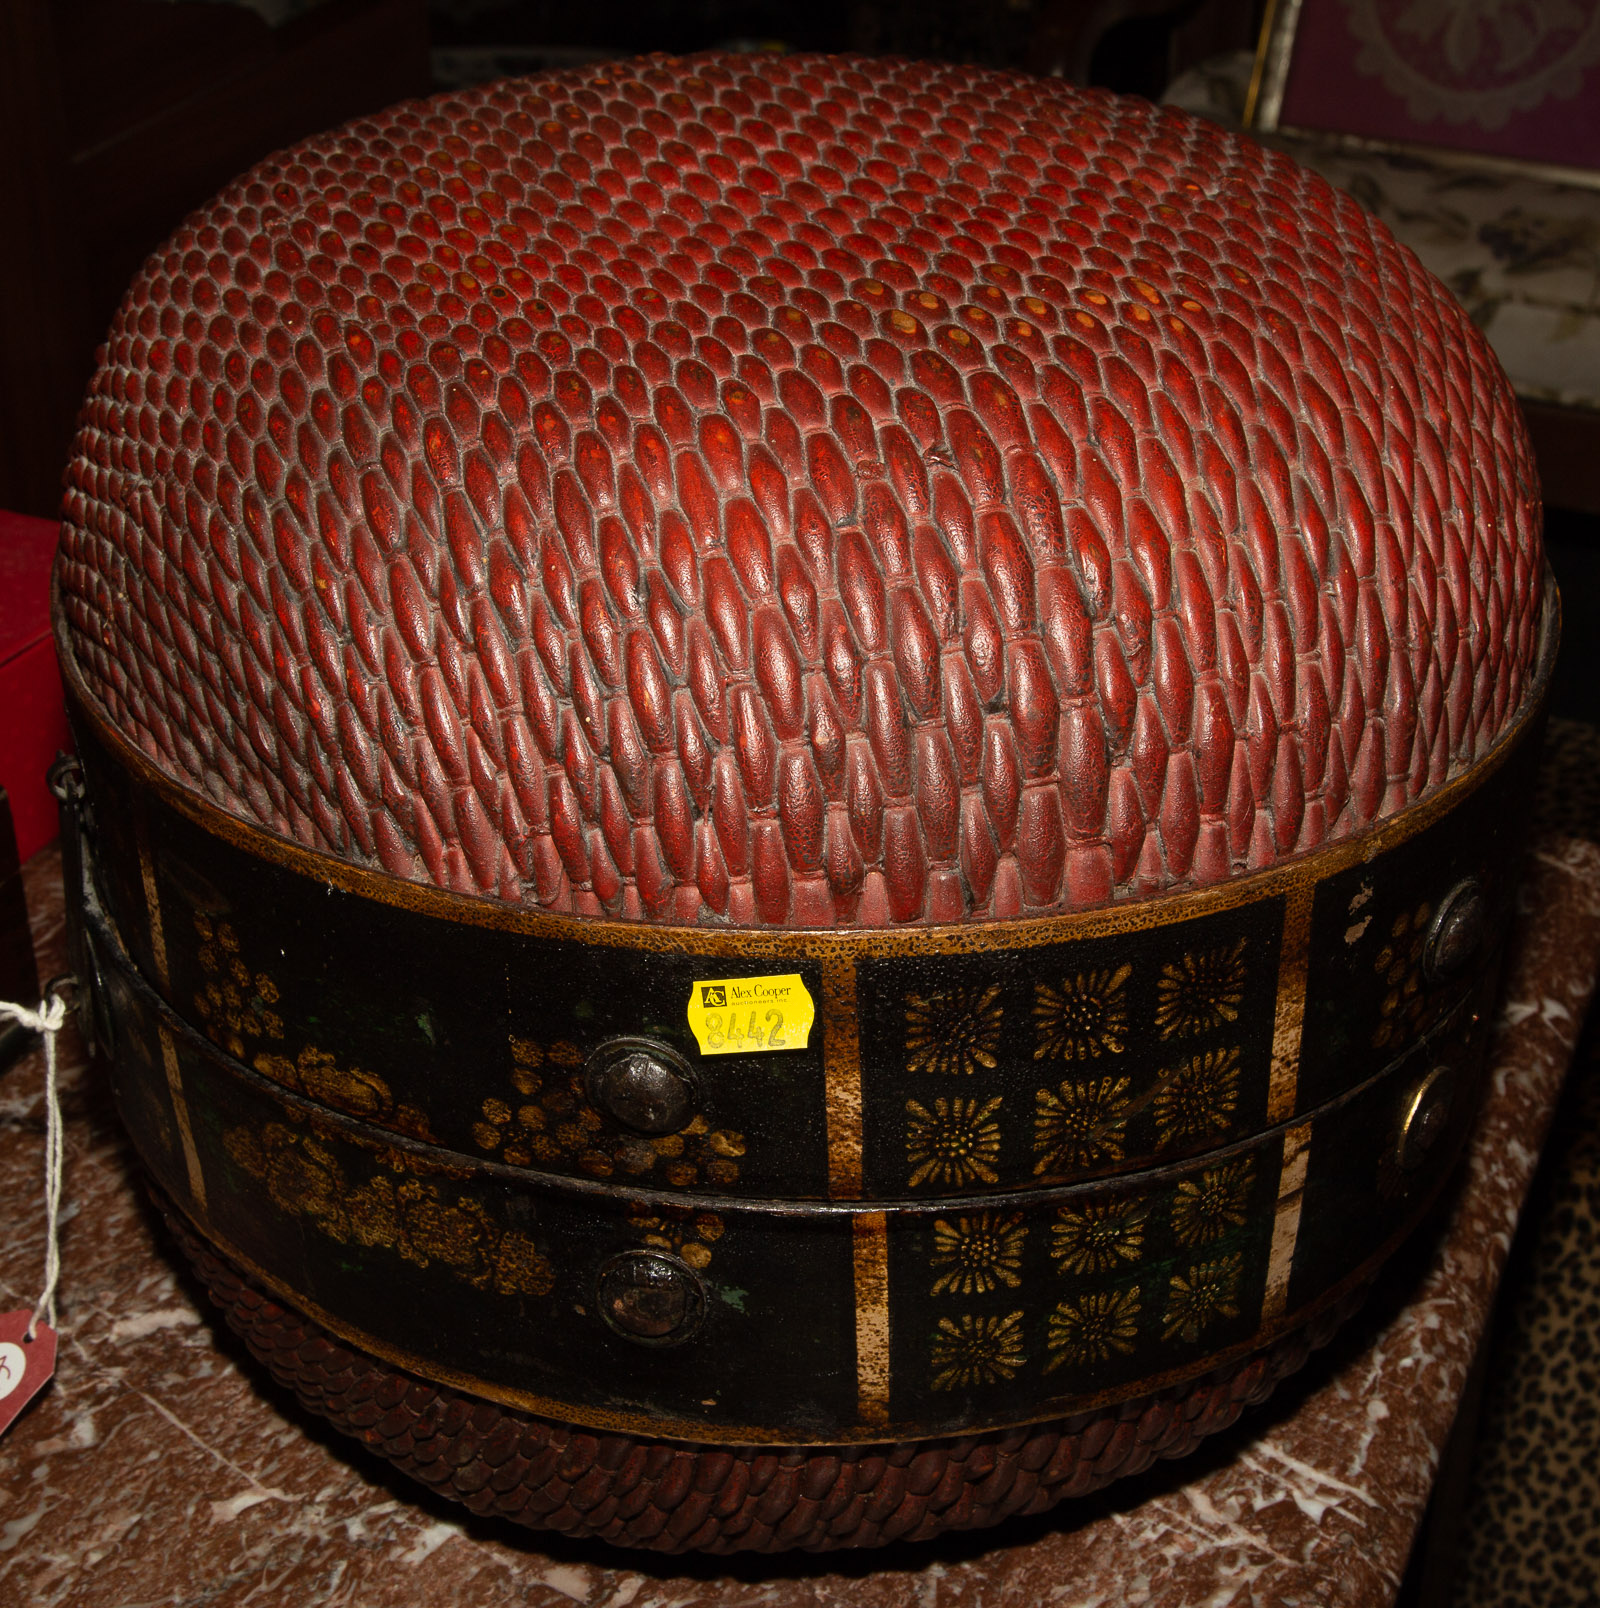 CHINESE LACQUERED WOOD BASKETRY 333f0d